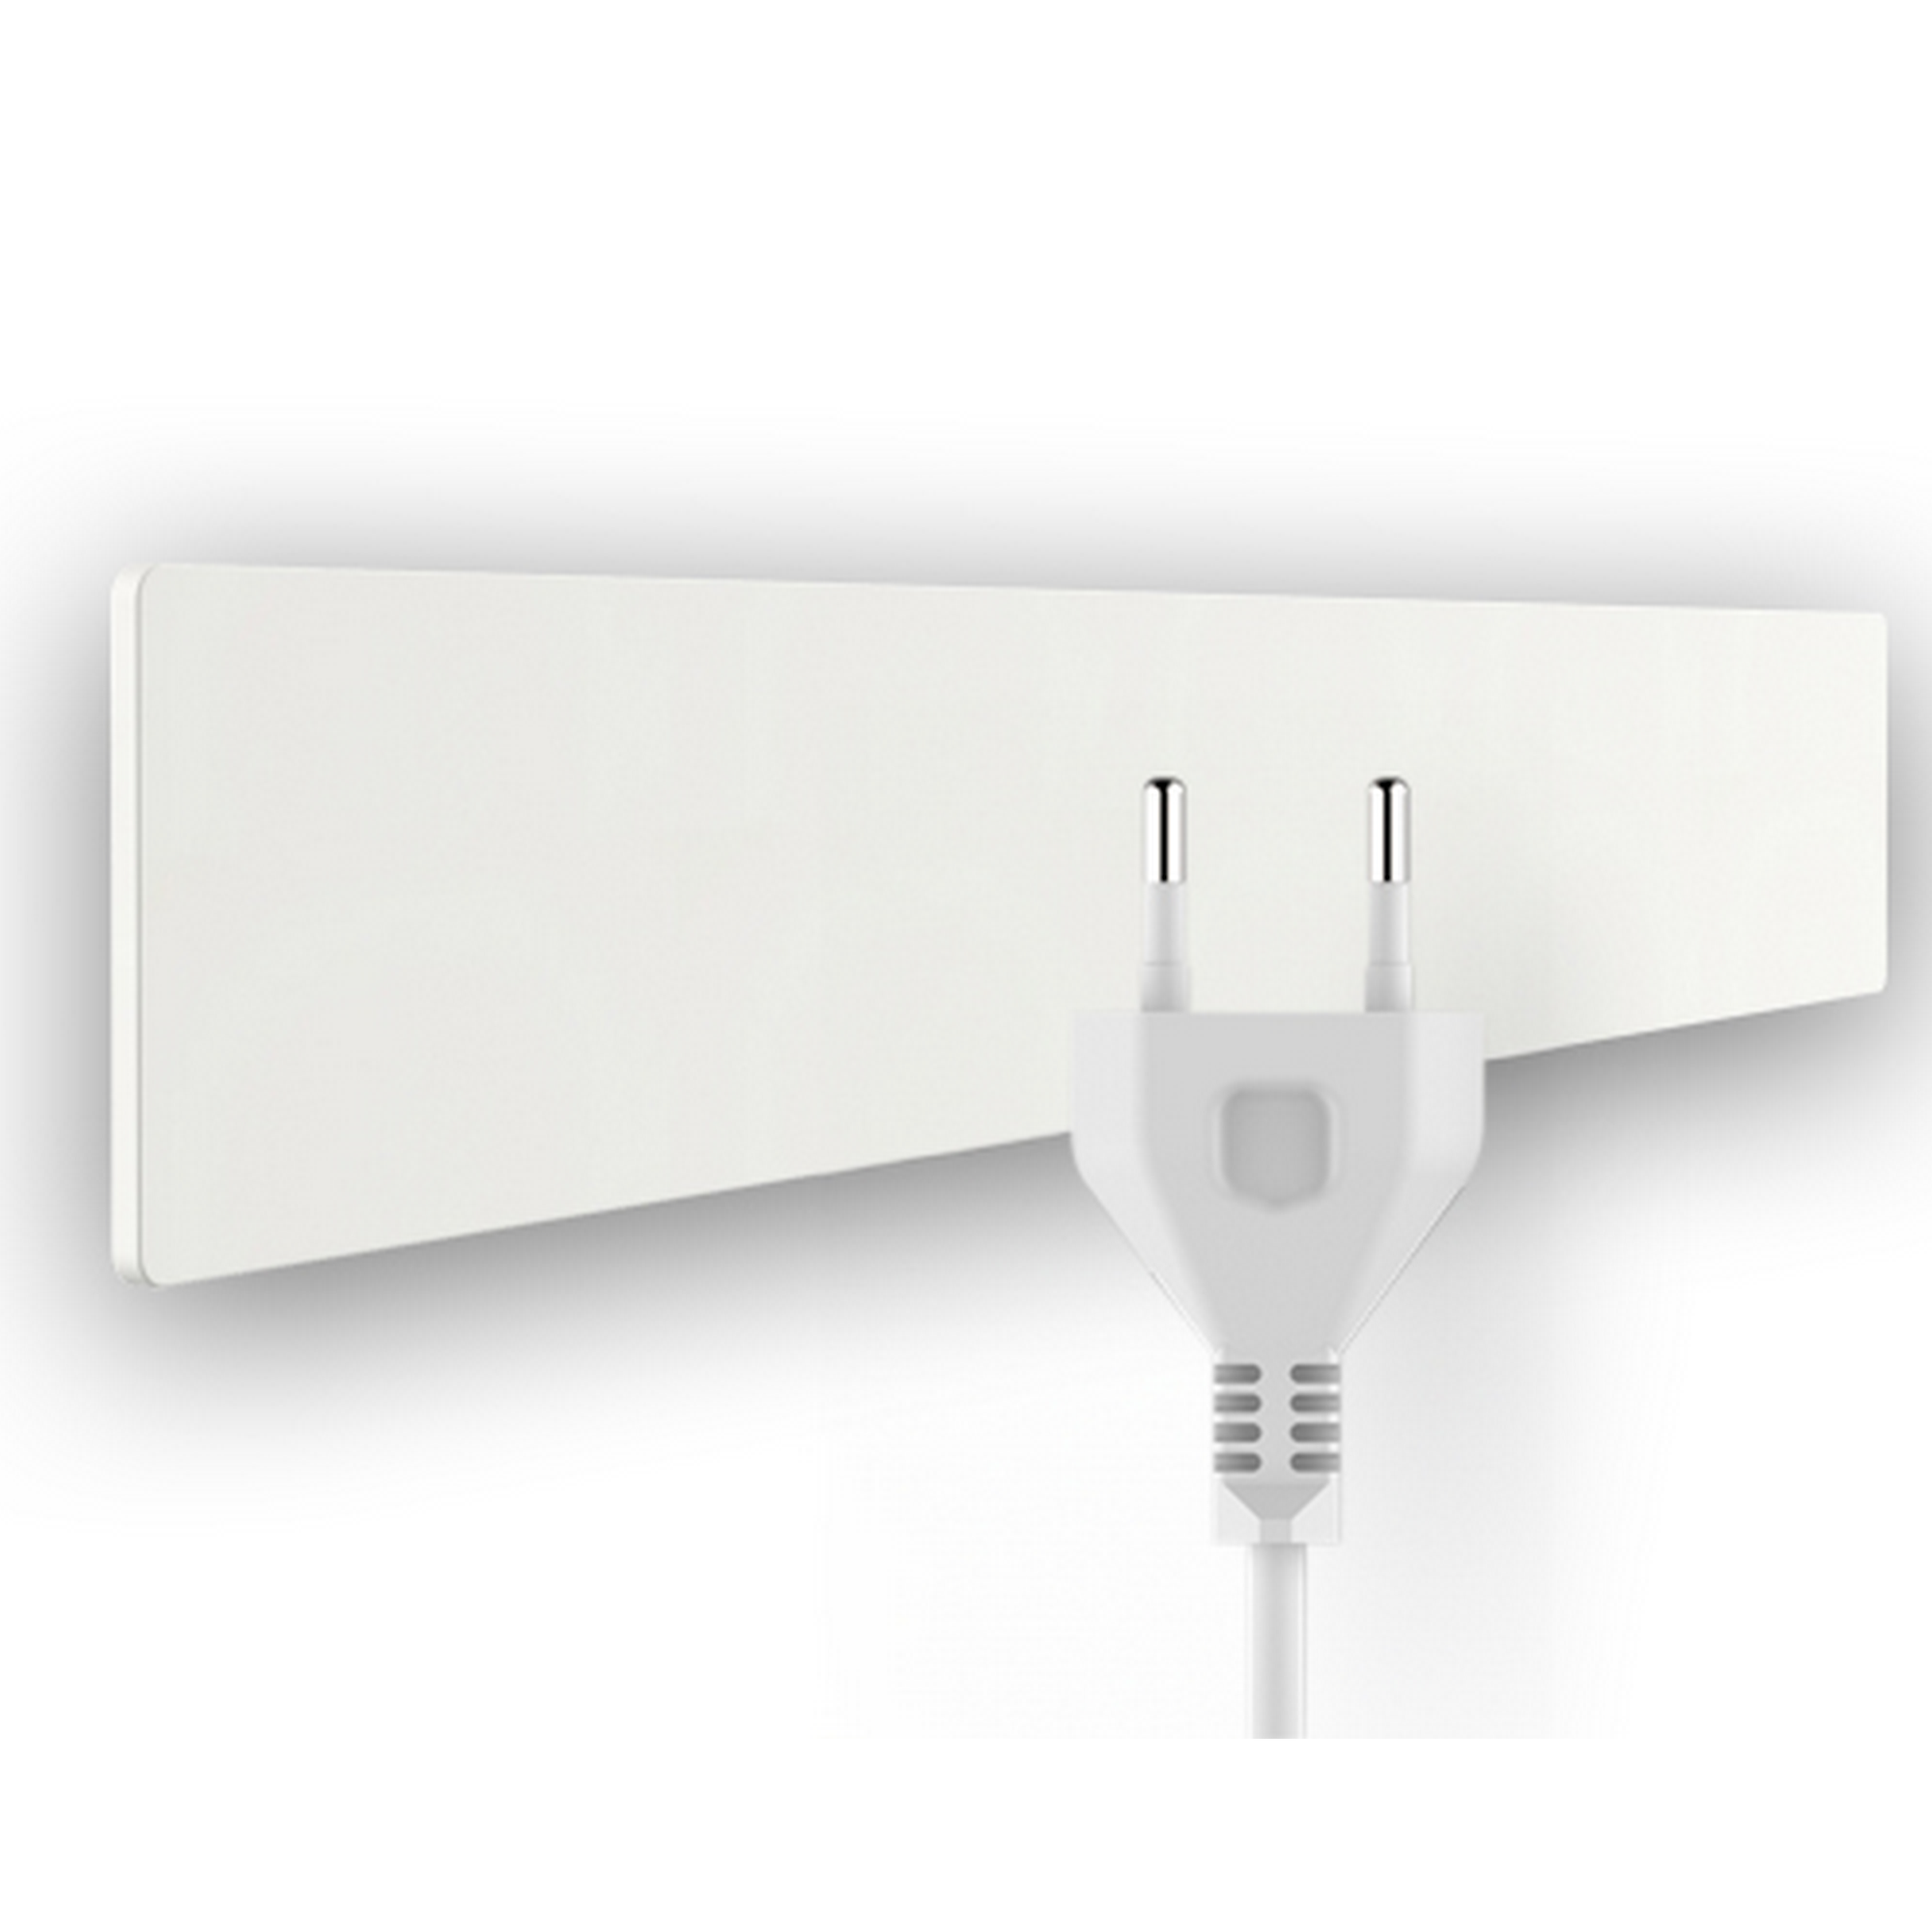 Schimmel Dry 'EDH-WHI-SDRY-M1' weiß 55 W + product picture